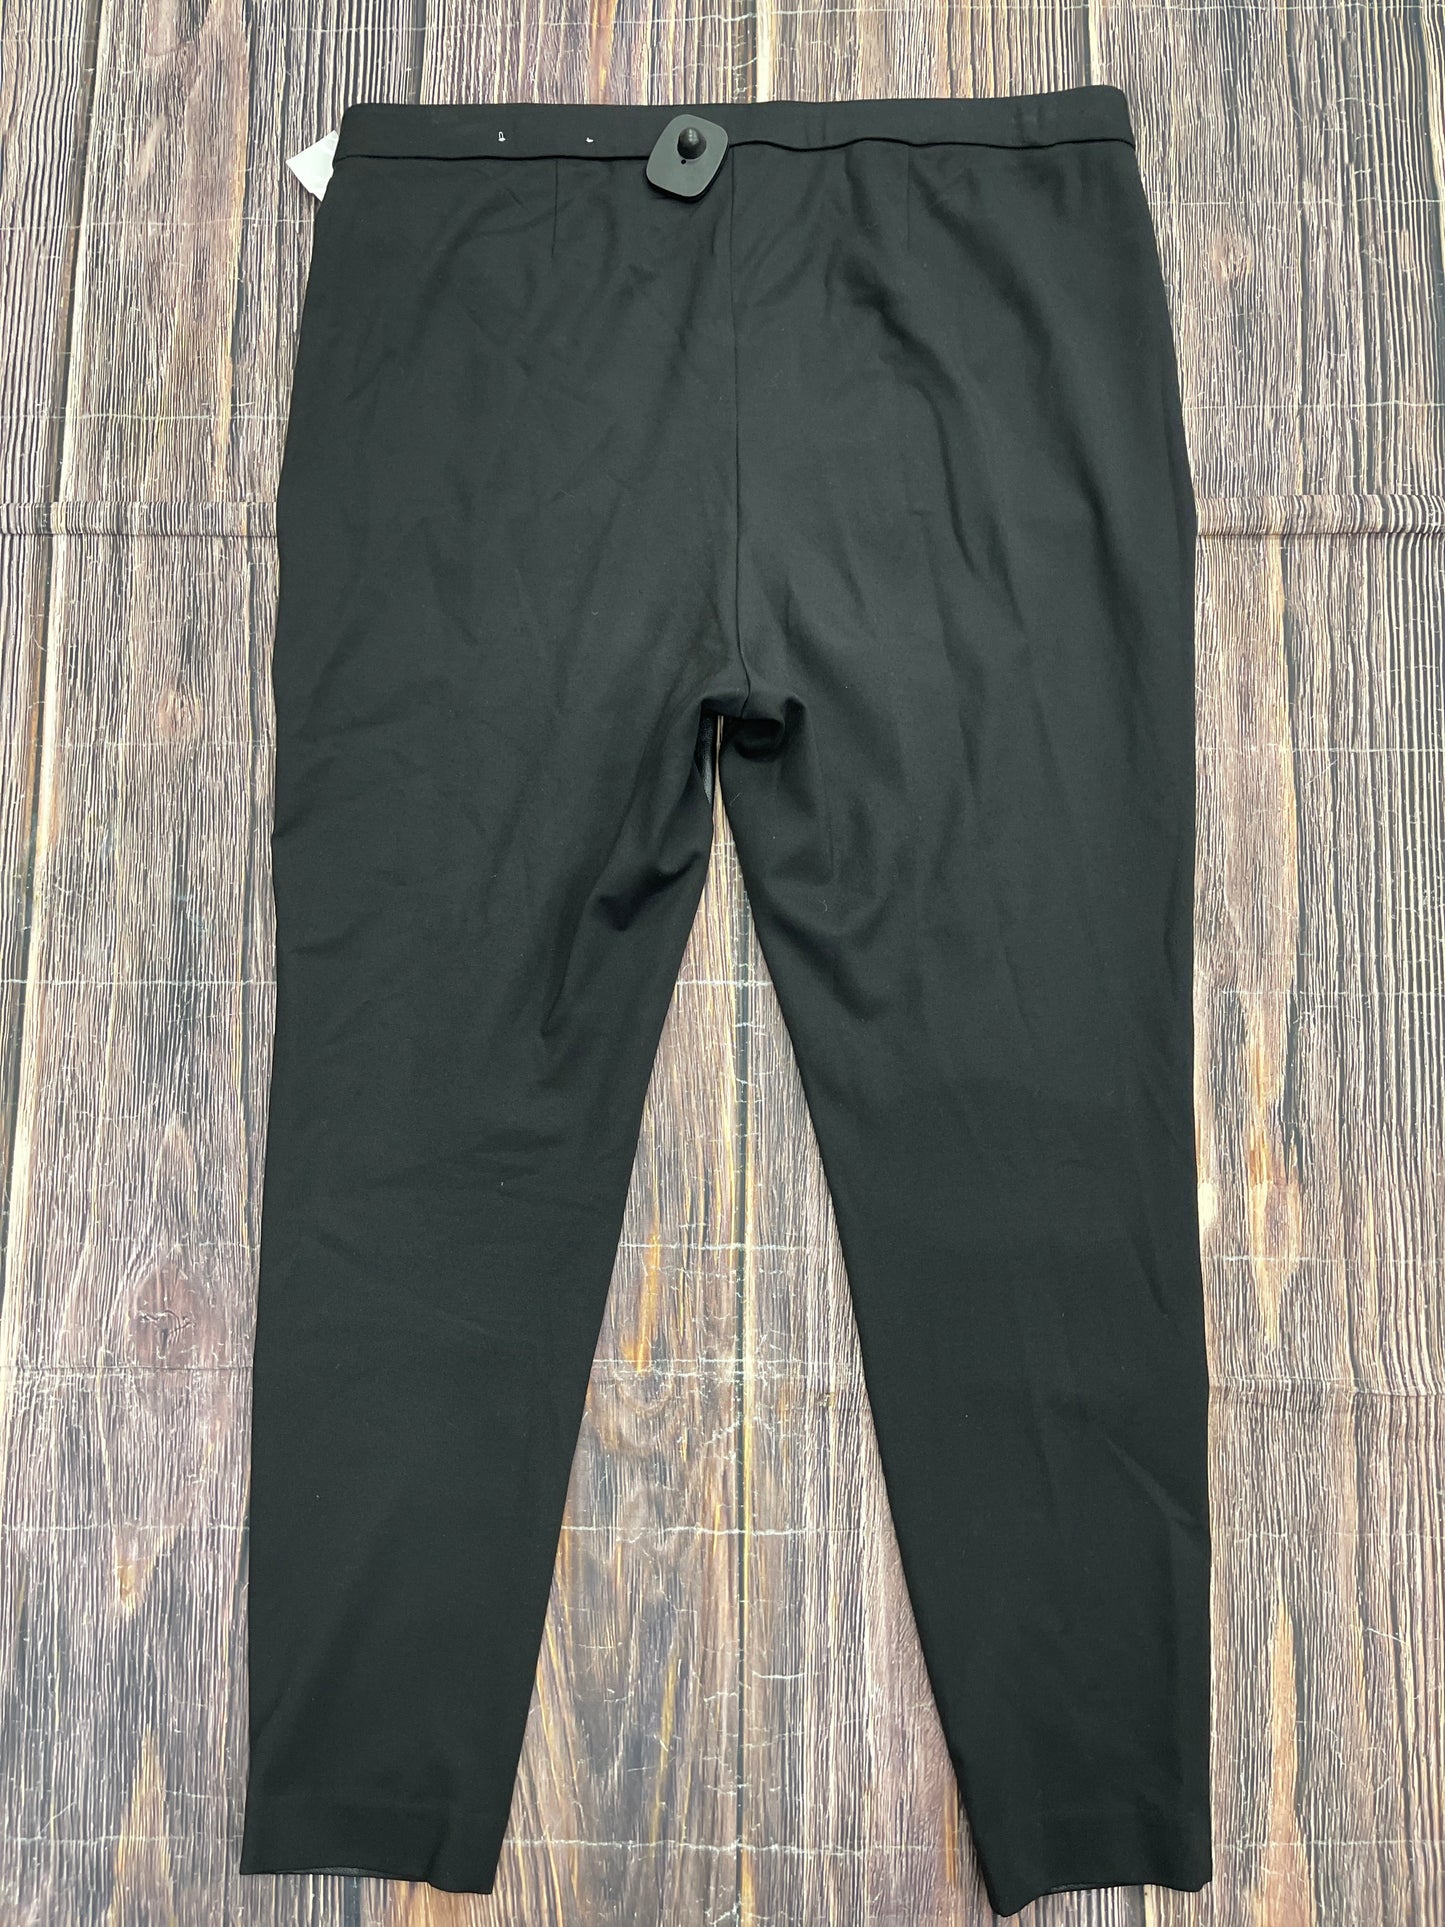 Pants Other By Chicos  Size: Xl